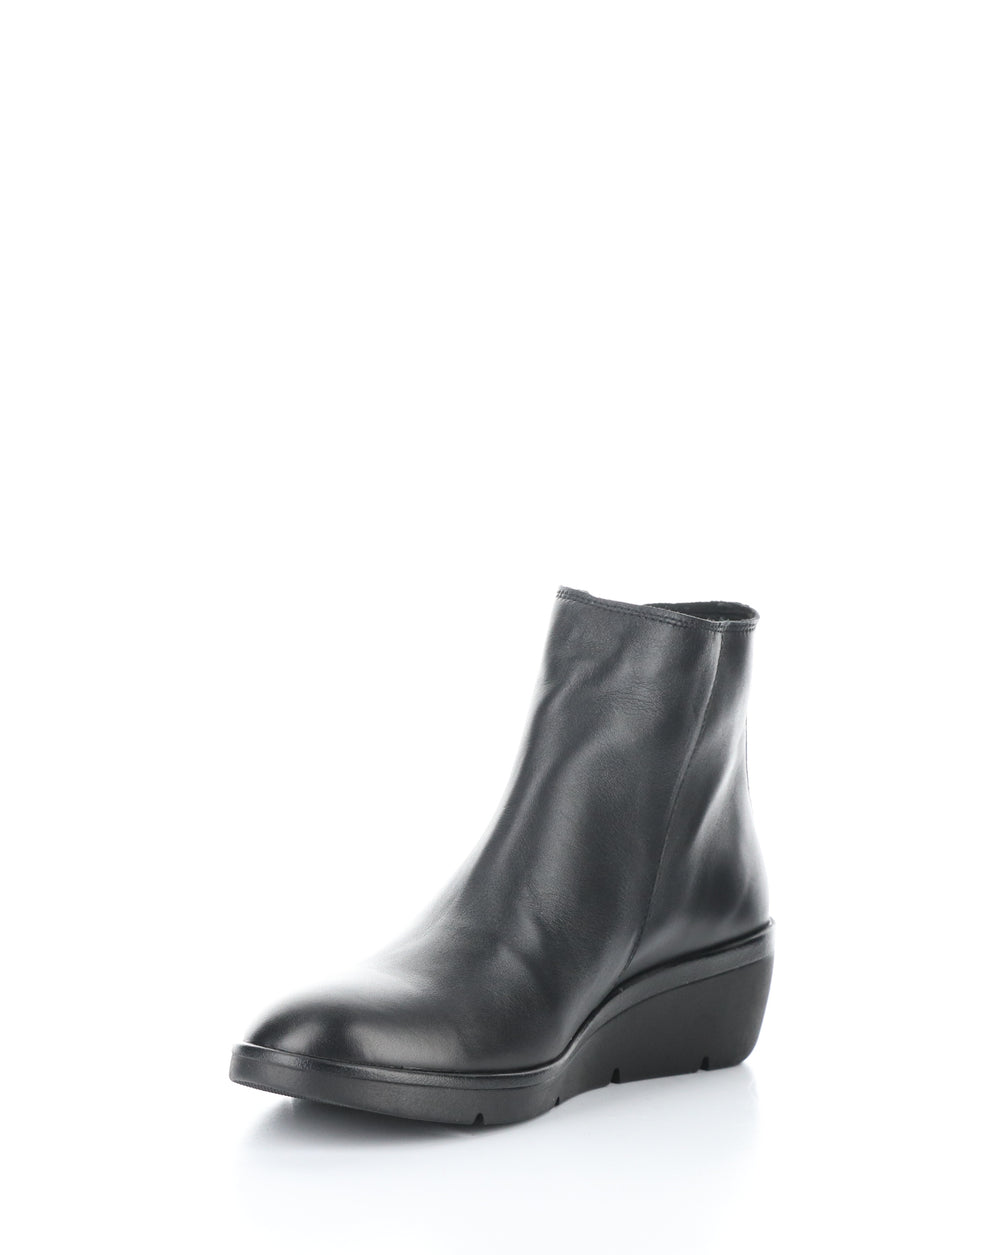 NULA550FLY 004 BLACK Round Toe Boots